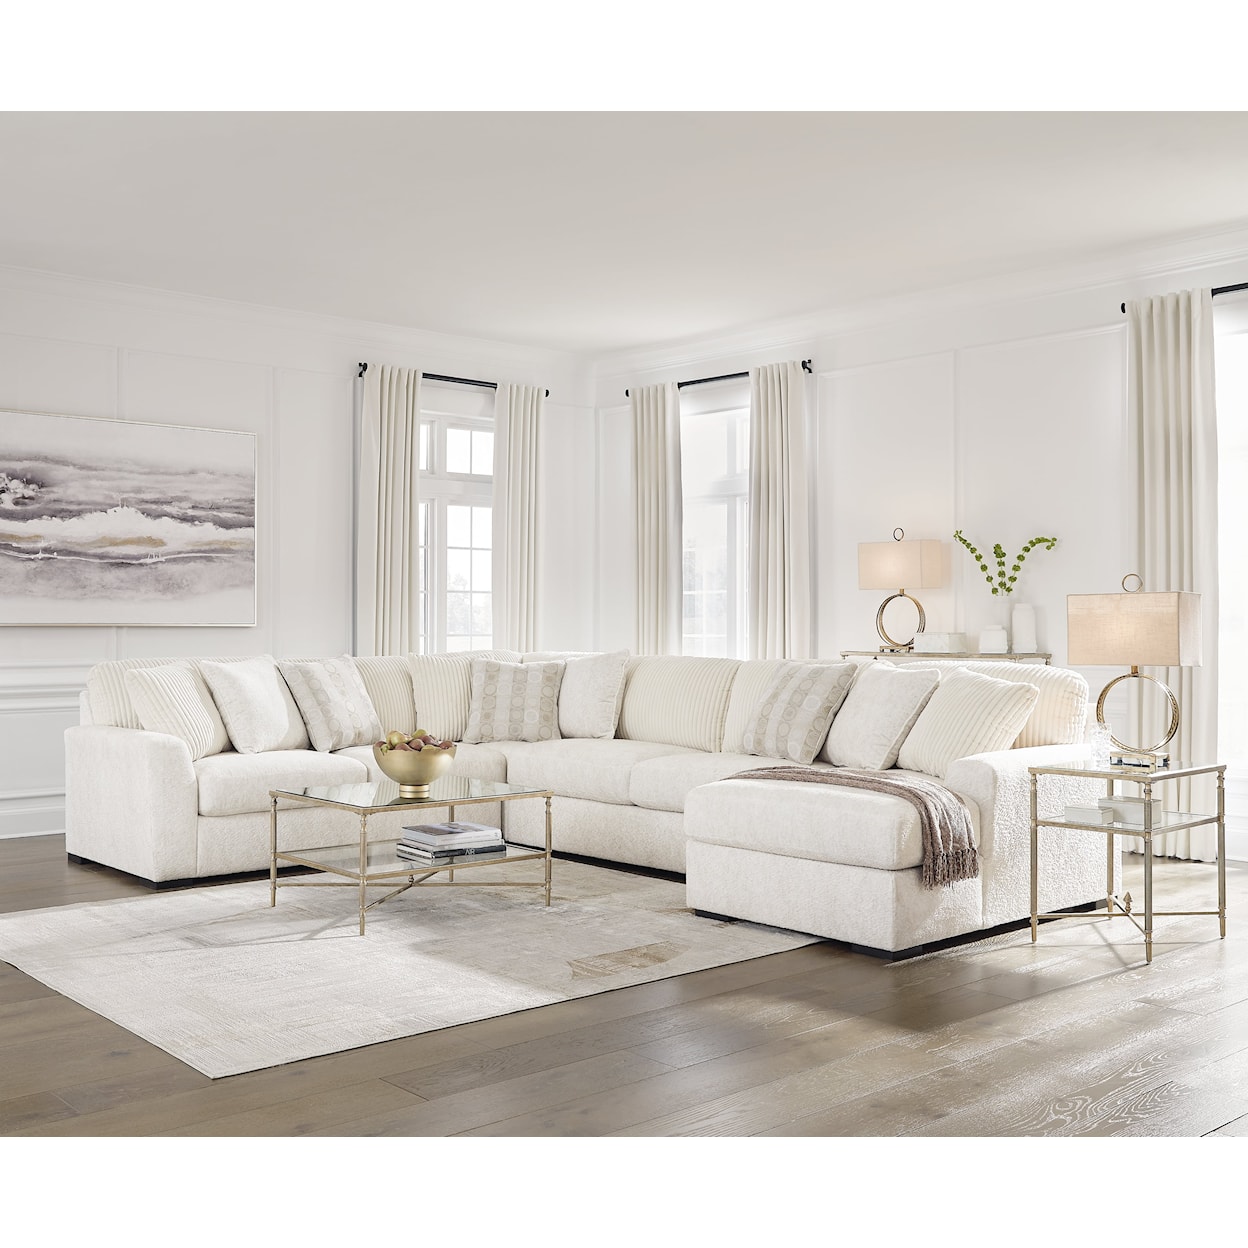 Signature Chessington 4-Piece Sectional With Chaise